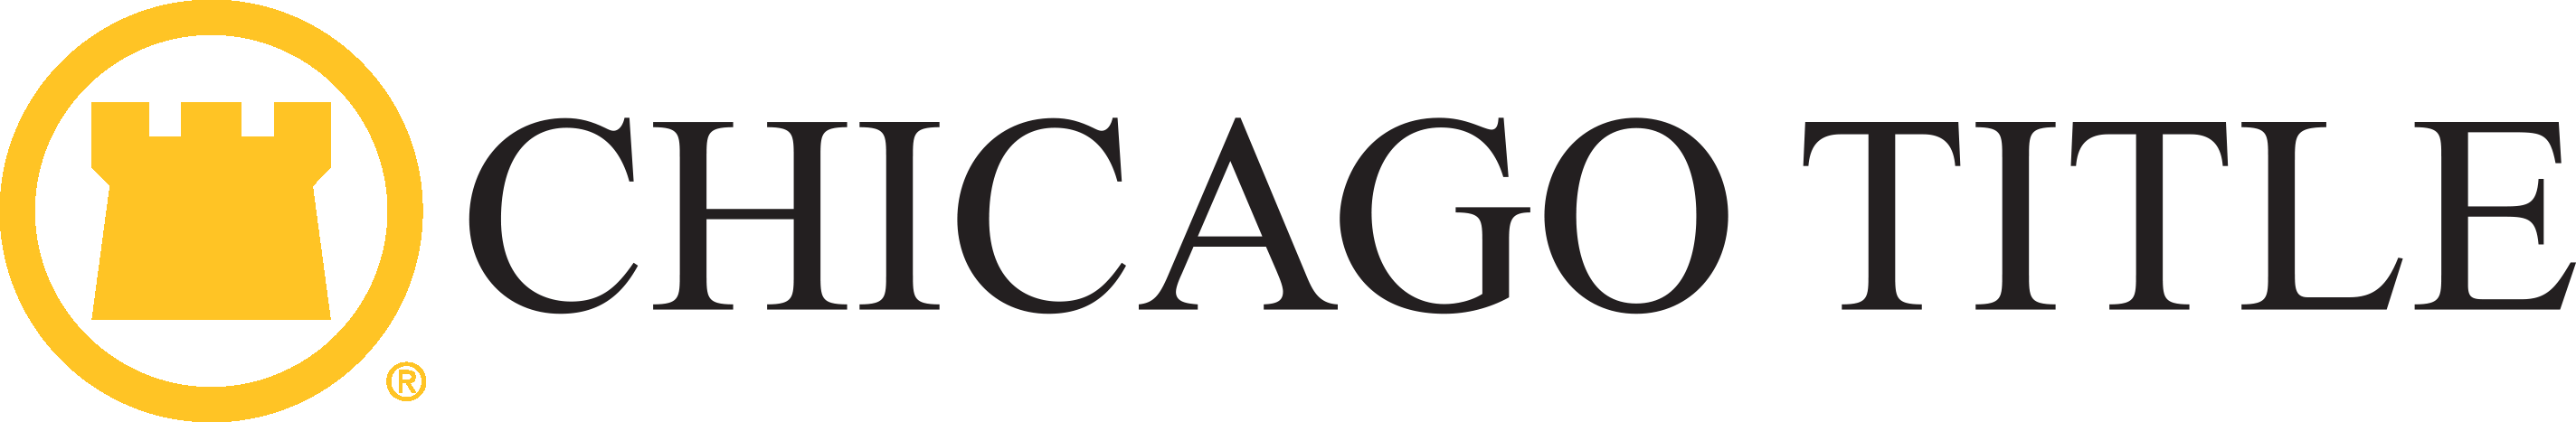 Chicago Title logo.png